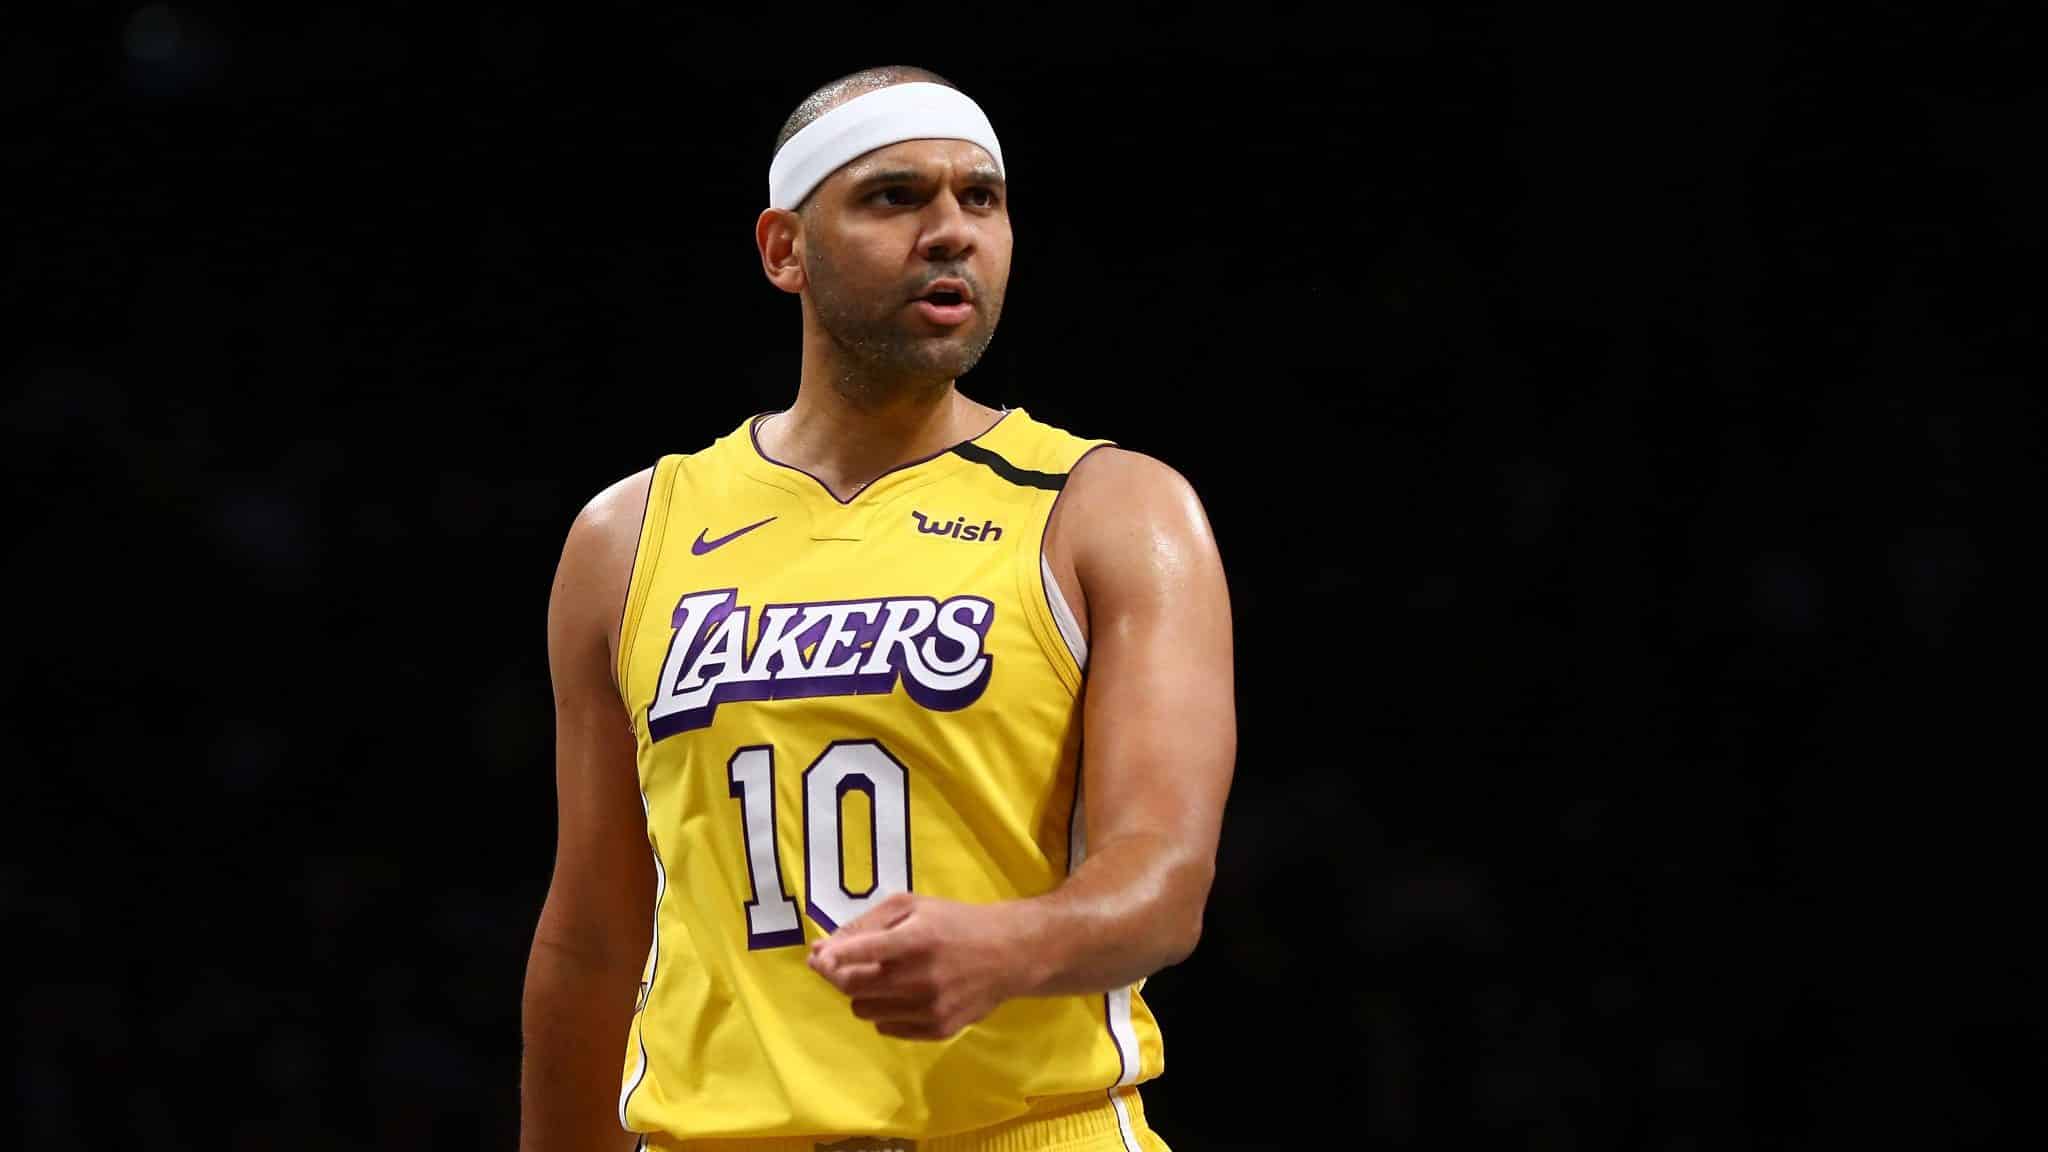 NEW YORK, NEW YORK - JANUARY 23: Jared Dudley #10 of the Los Angeles Lakers in action against the Brooklyn Netsat Barclays Center on January 23, 2020 in New York City. NOTE TO USER: User expressly acknowledges and agrees that, by downloading and or using this photograph, User is consenting to the terms and conditions of the Getty Images License Agreement.